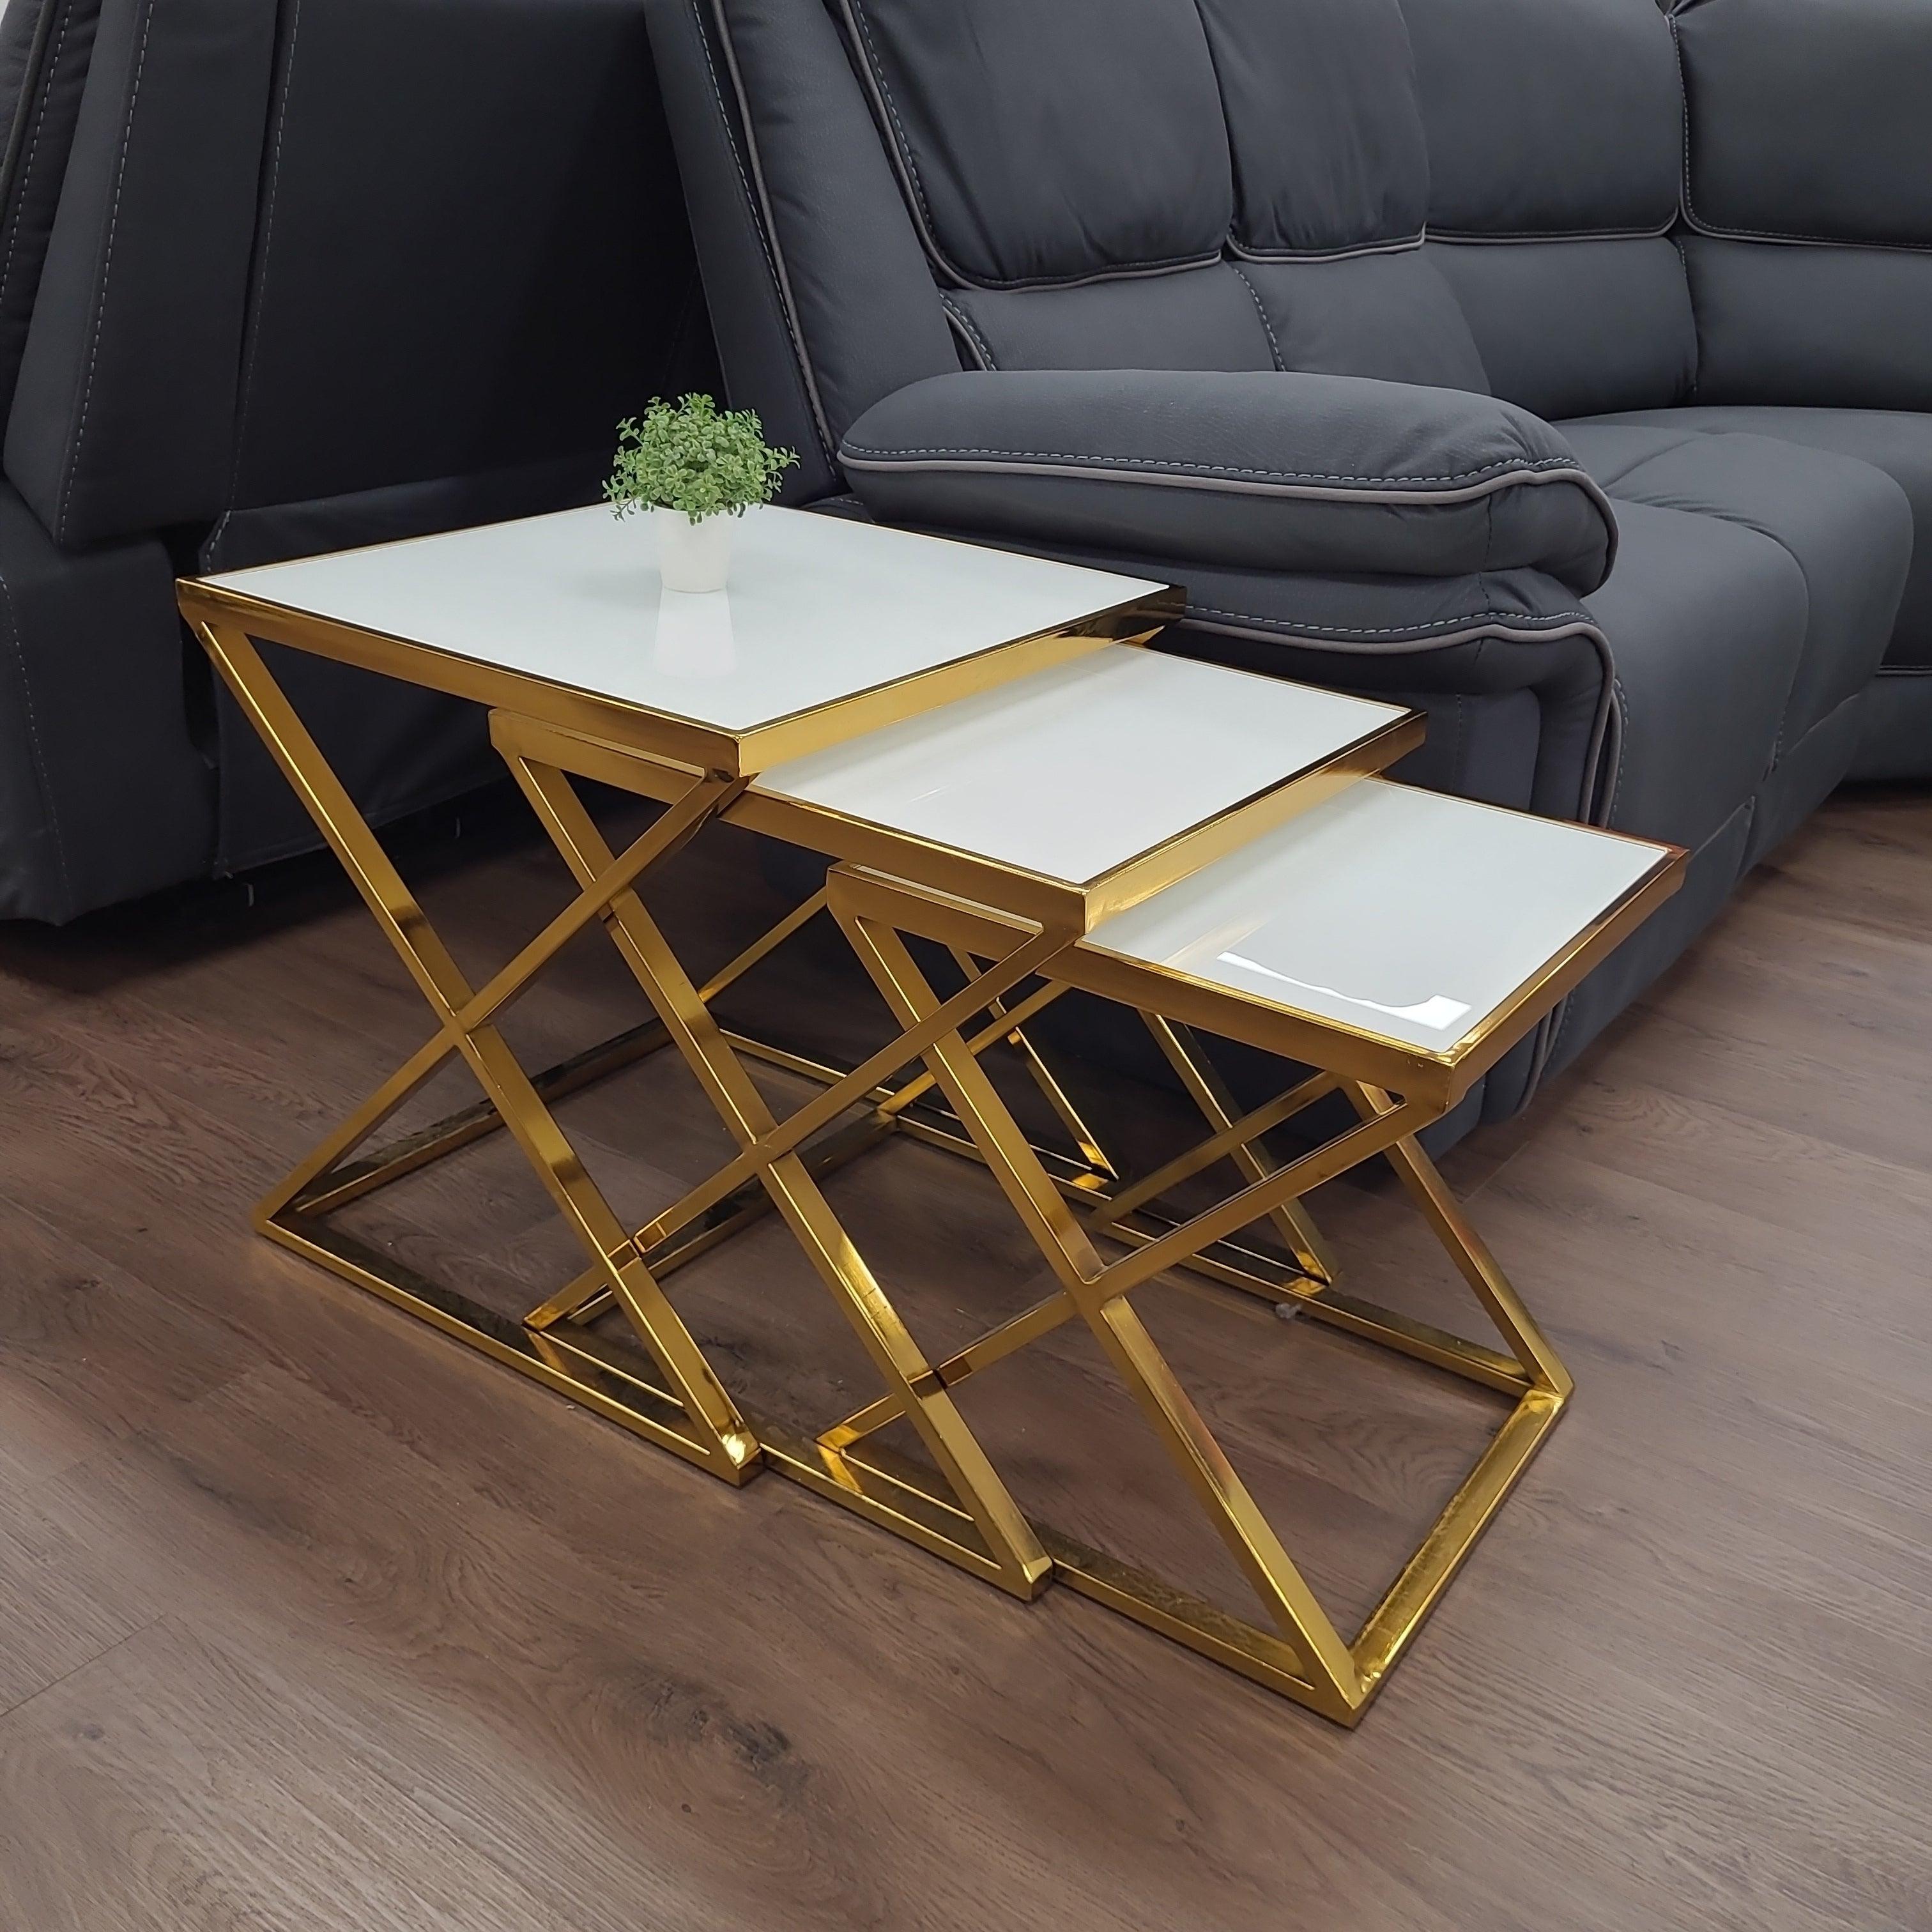 Upgrade Your Home: Nest 200 G - Stylish Glass Nesting Tables